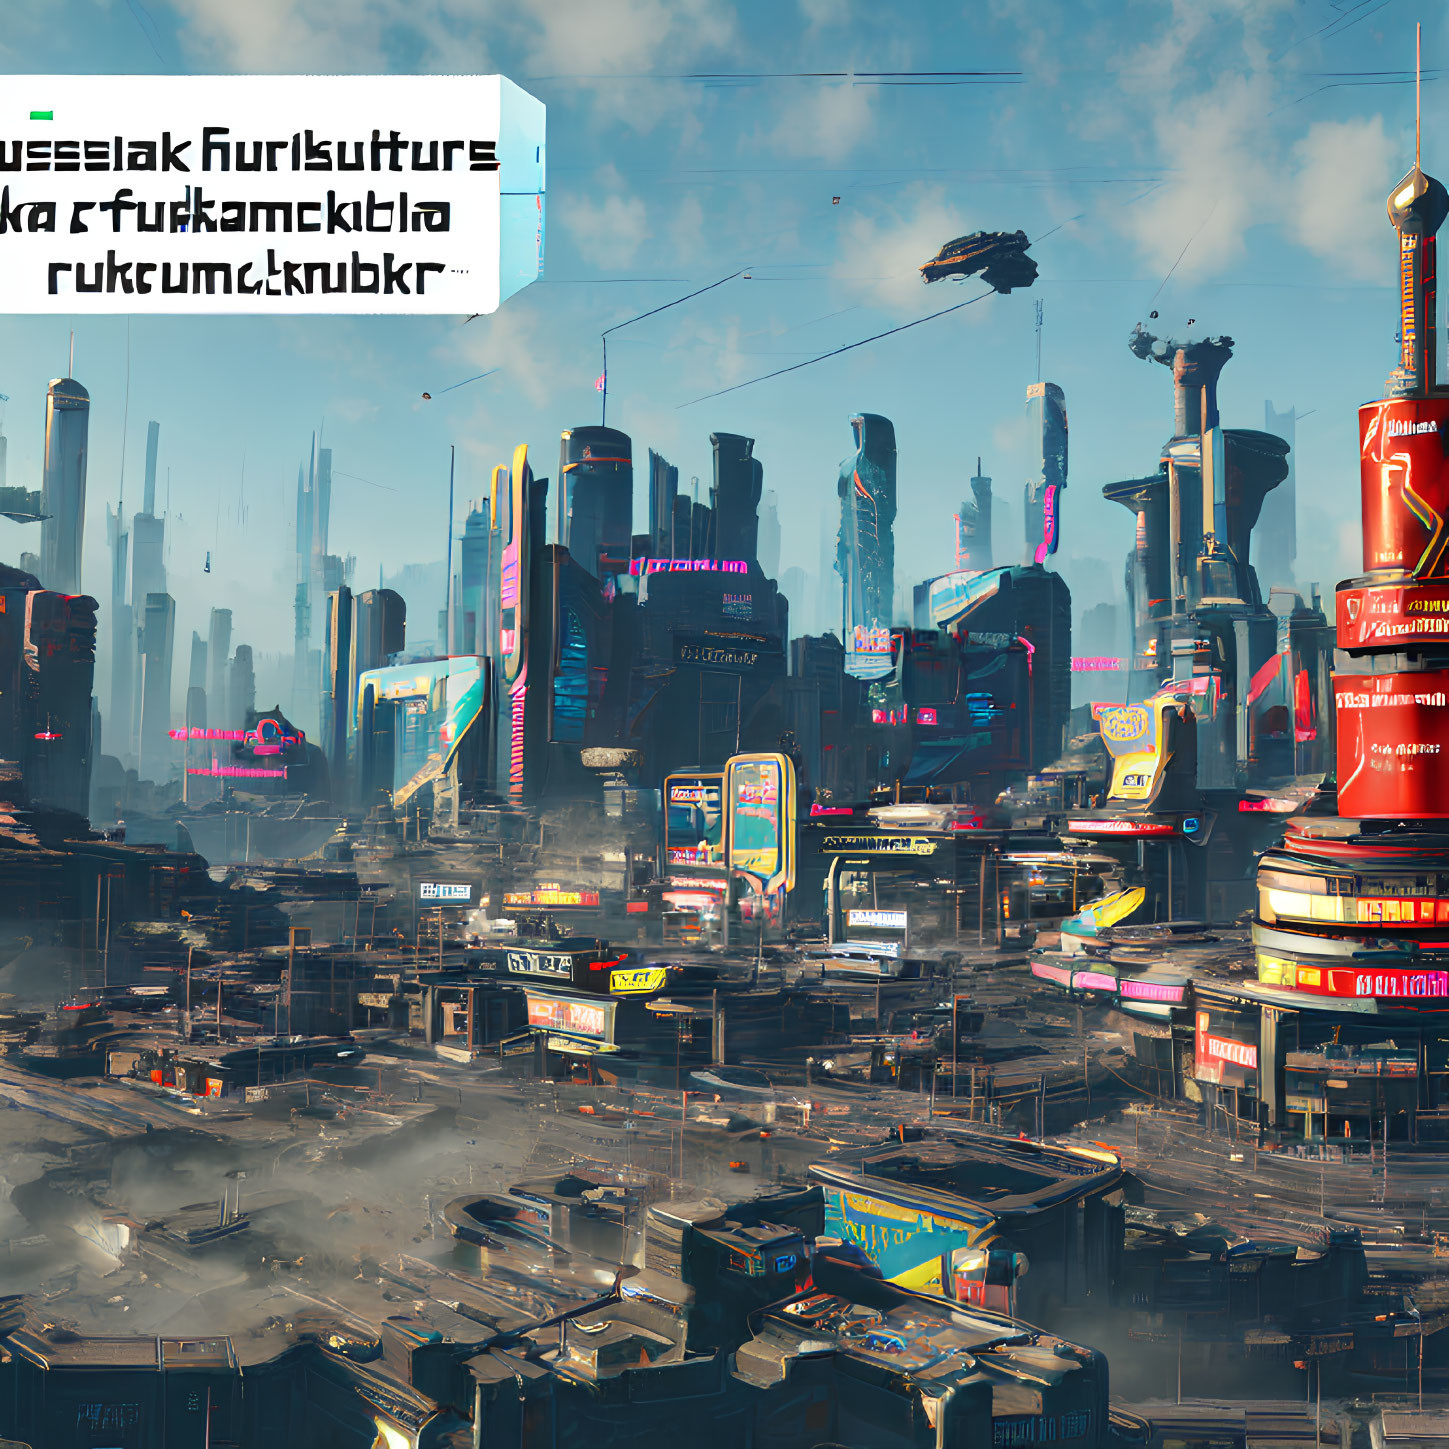 Futuristic cityscape with skyscrapers, neon signs, flying vehicles